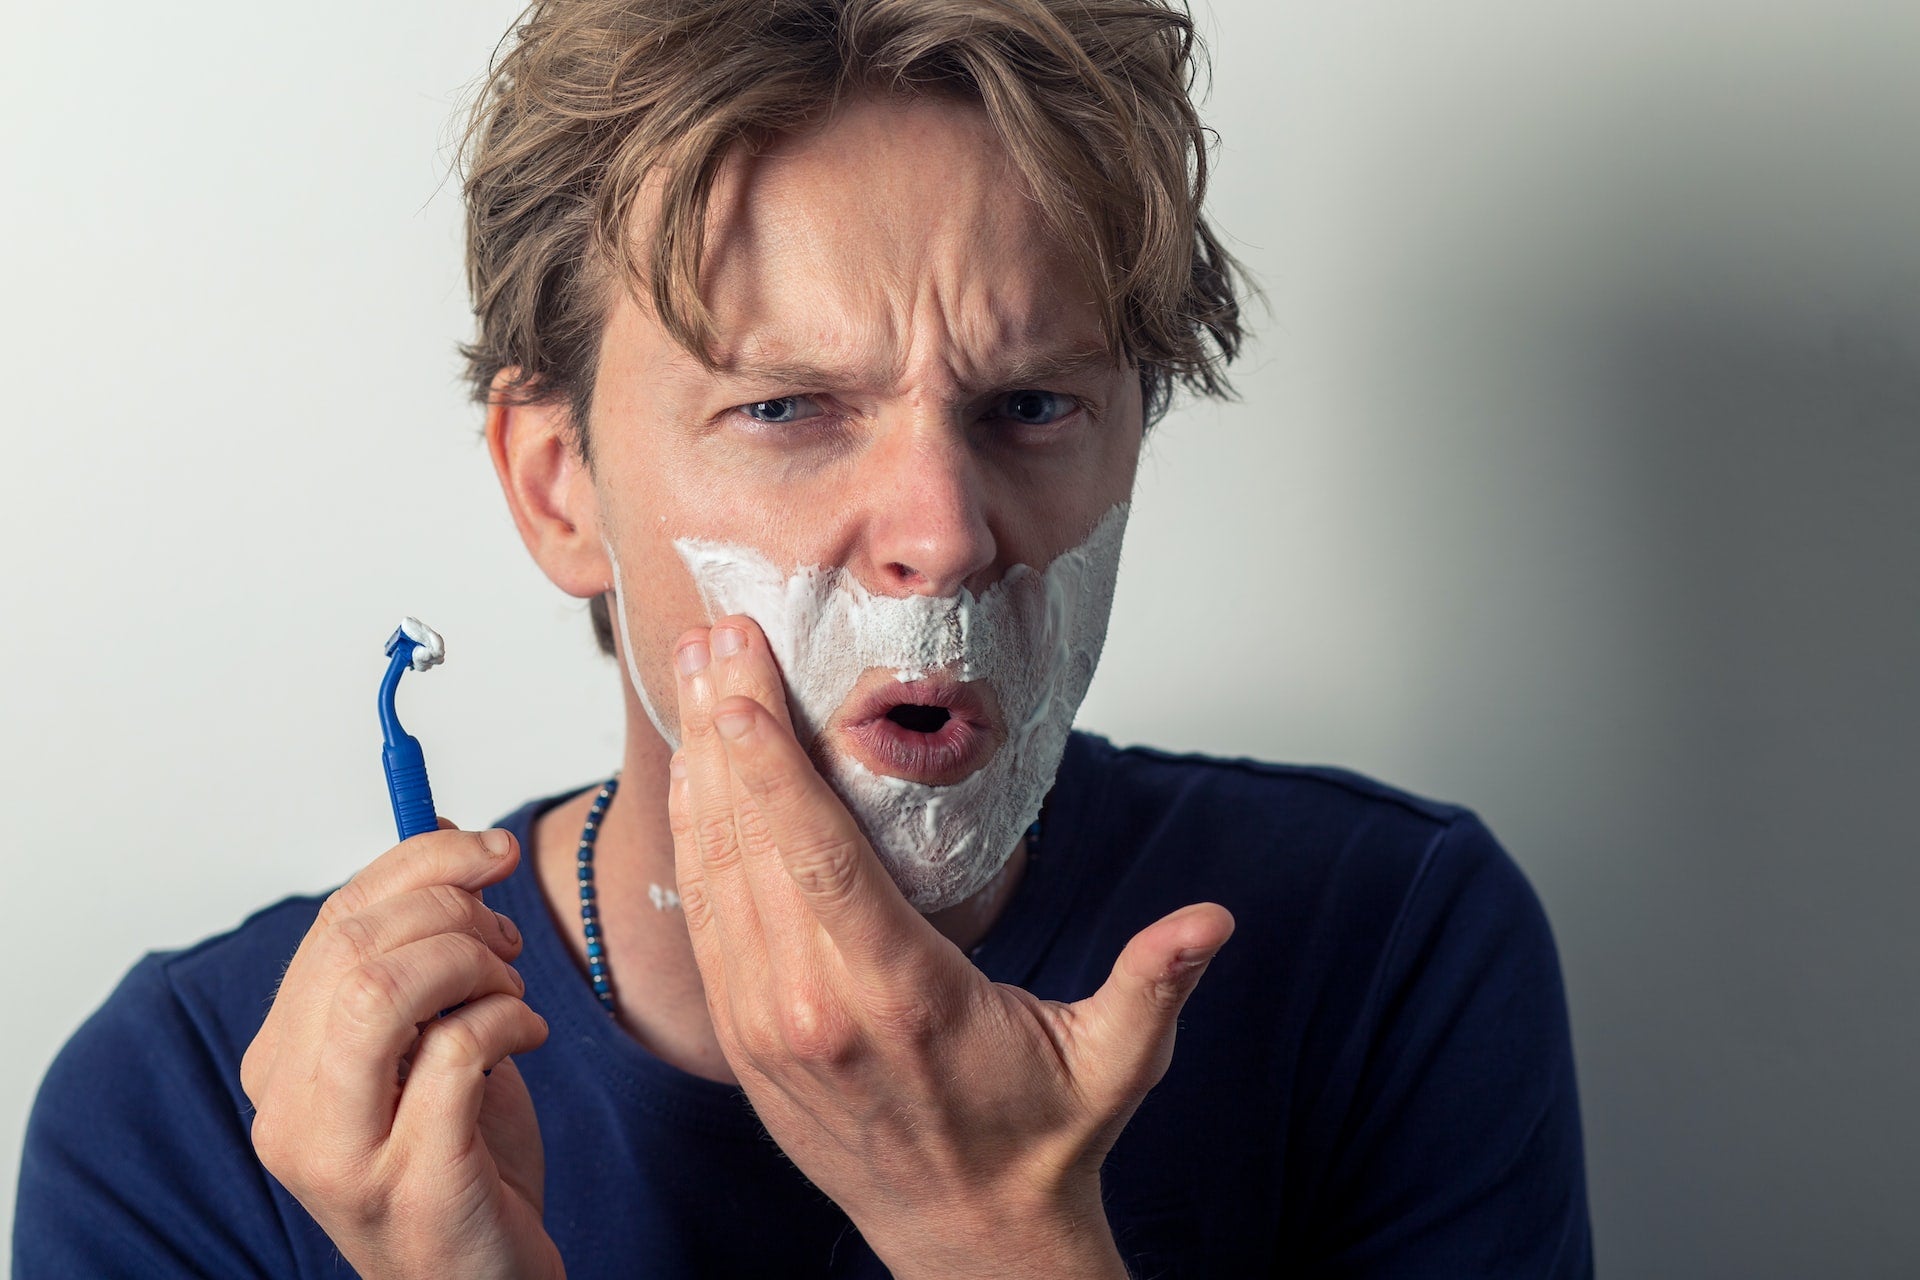 Some Valuable Tips to Help You Prevent Pimples after Shaving